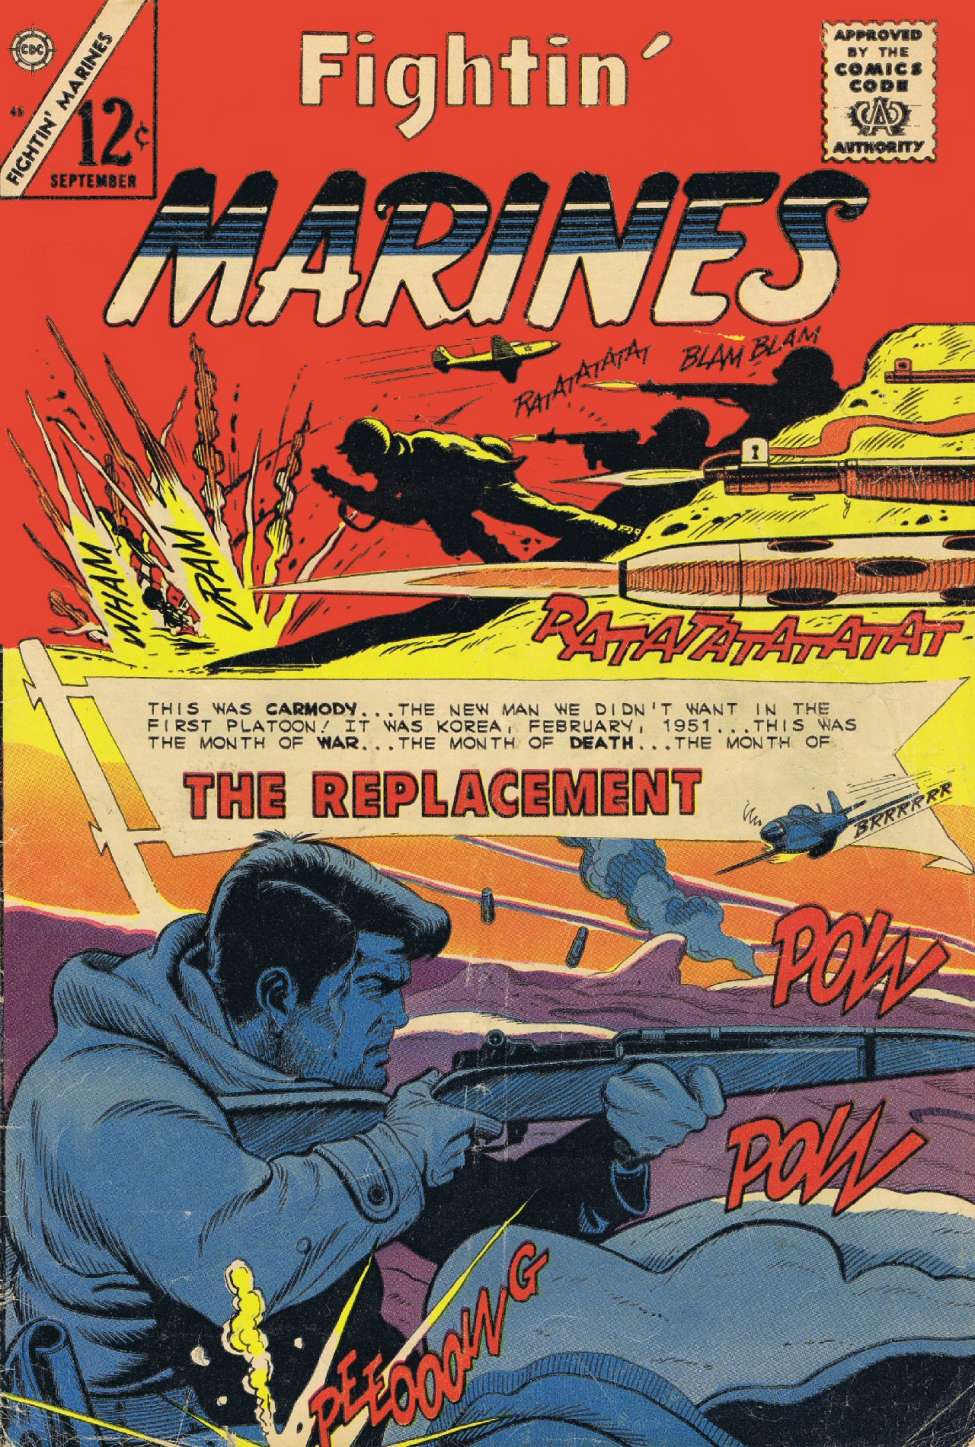 Comic Book Cover For Fightin' Marines 65